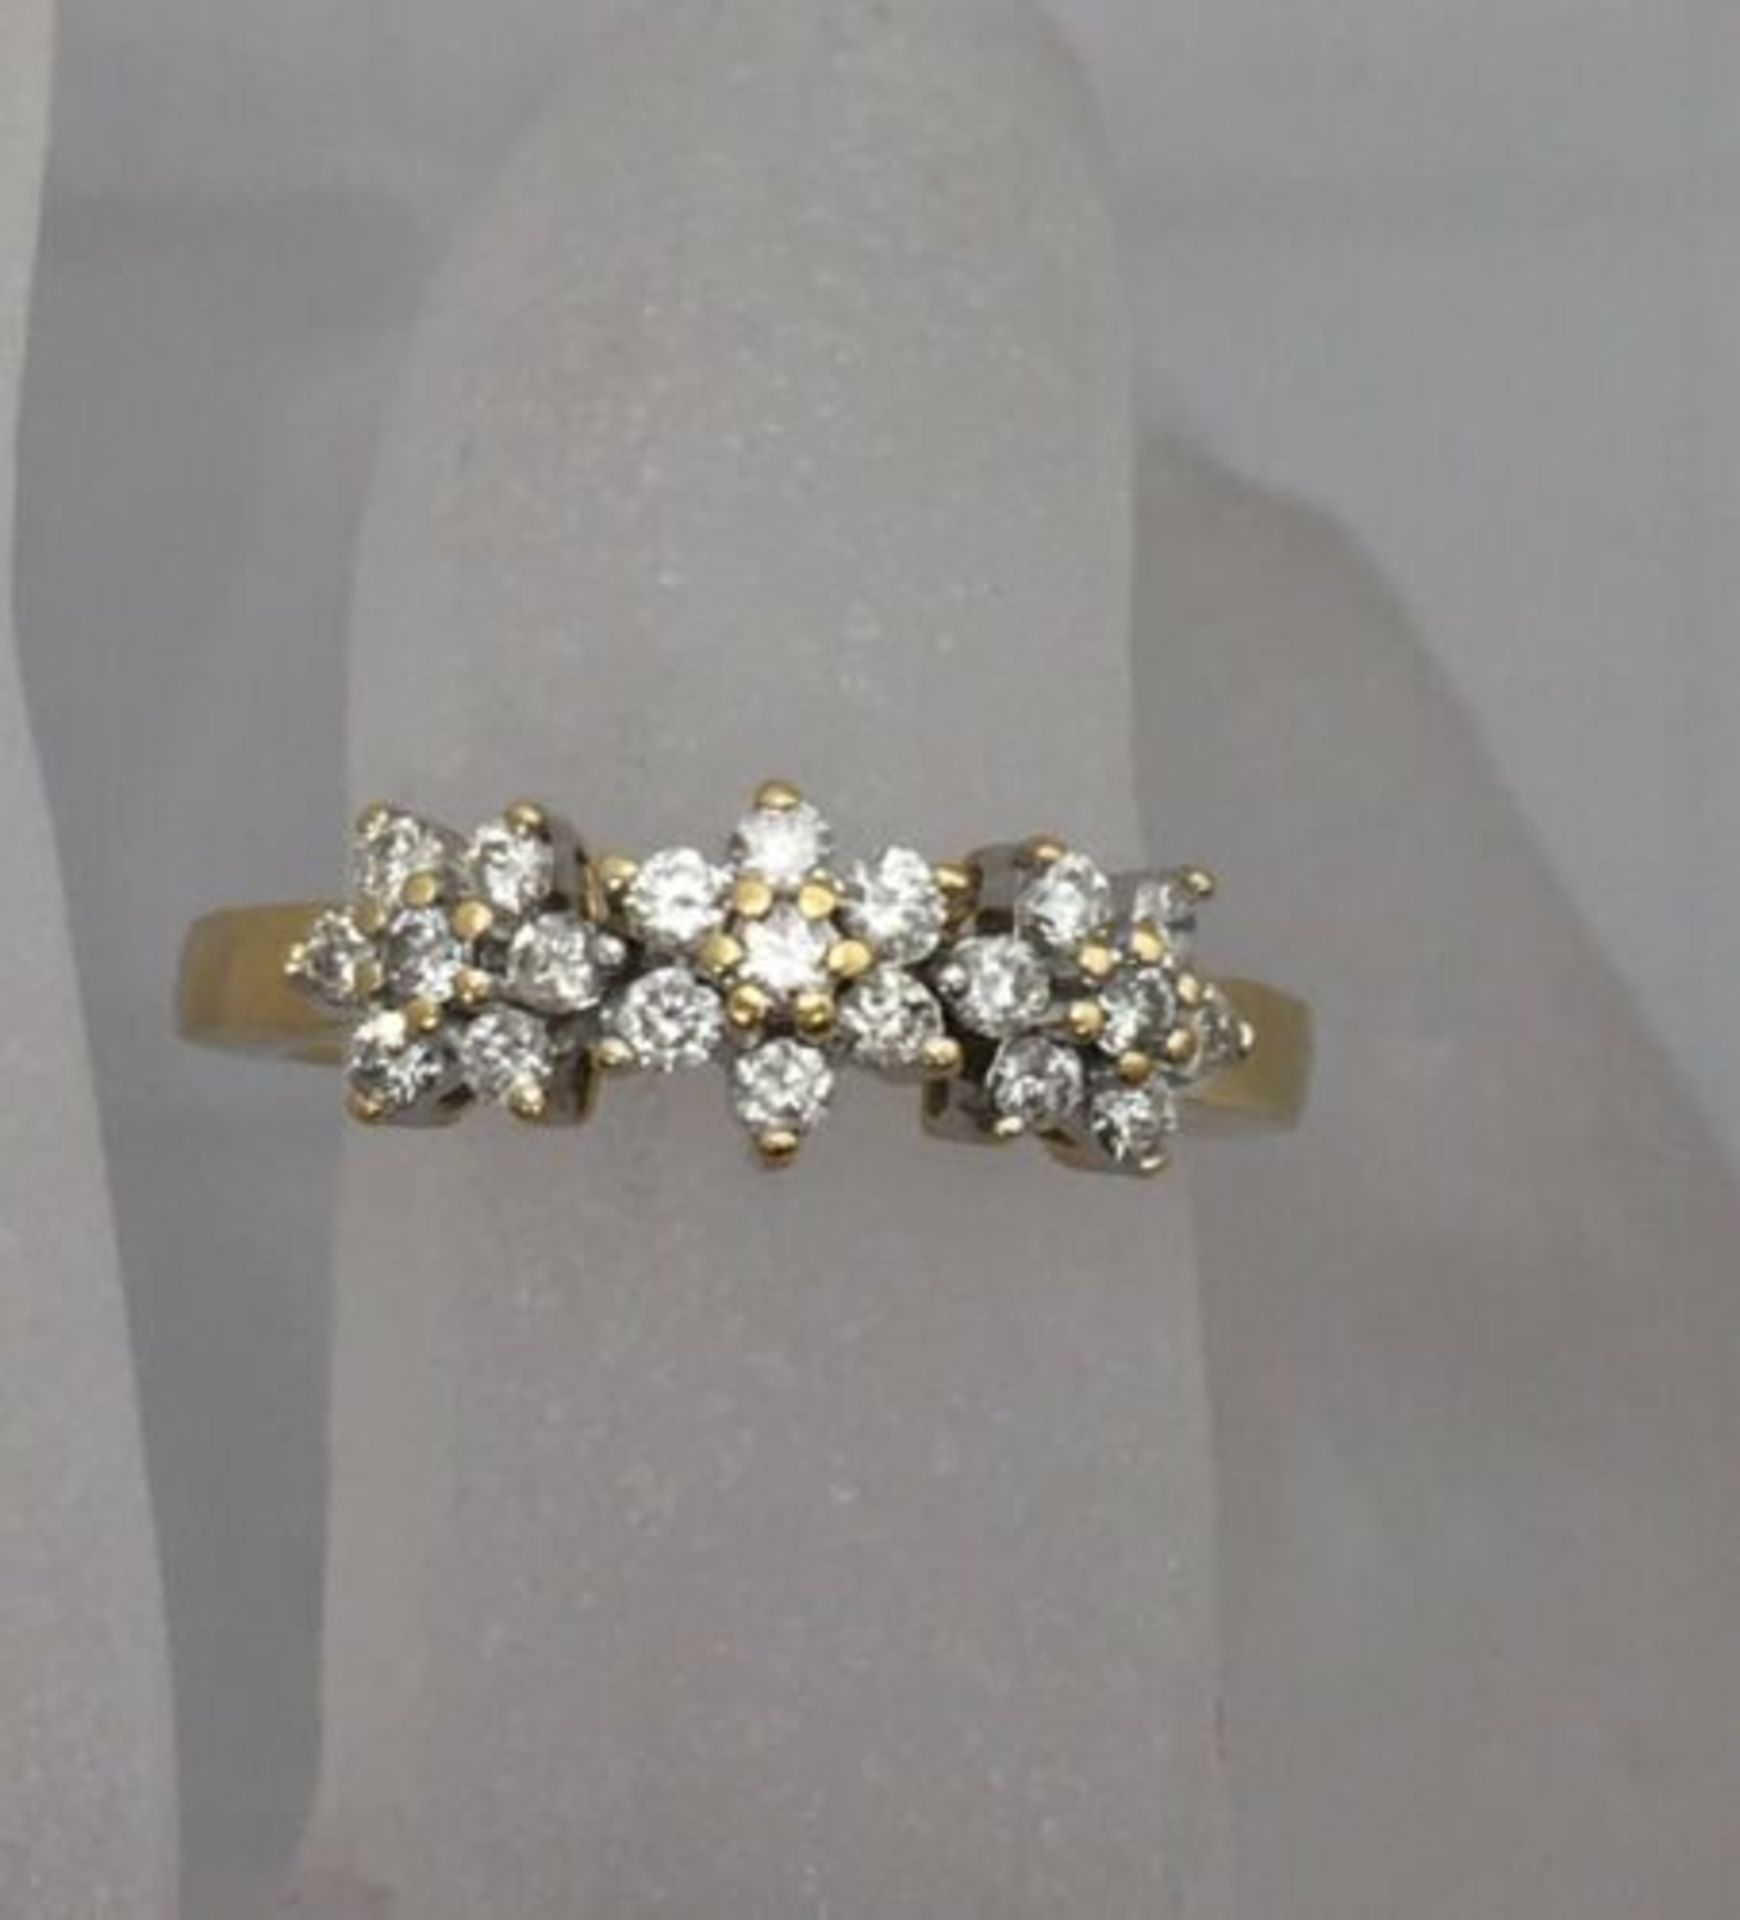 CLUSTER DIAMOND DRESS/ENGAGEMENT RING 18CT YELLOW GOLD - Image 4 of 4